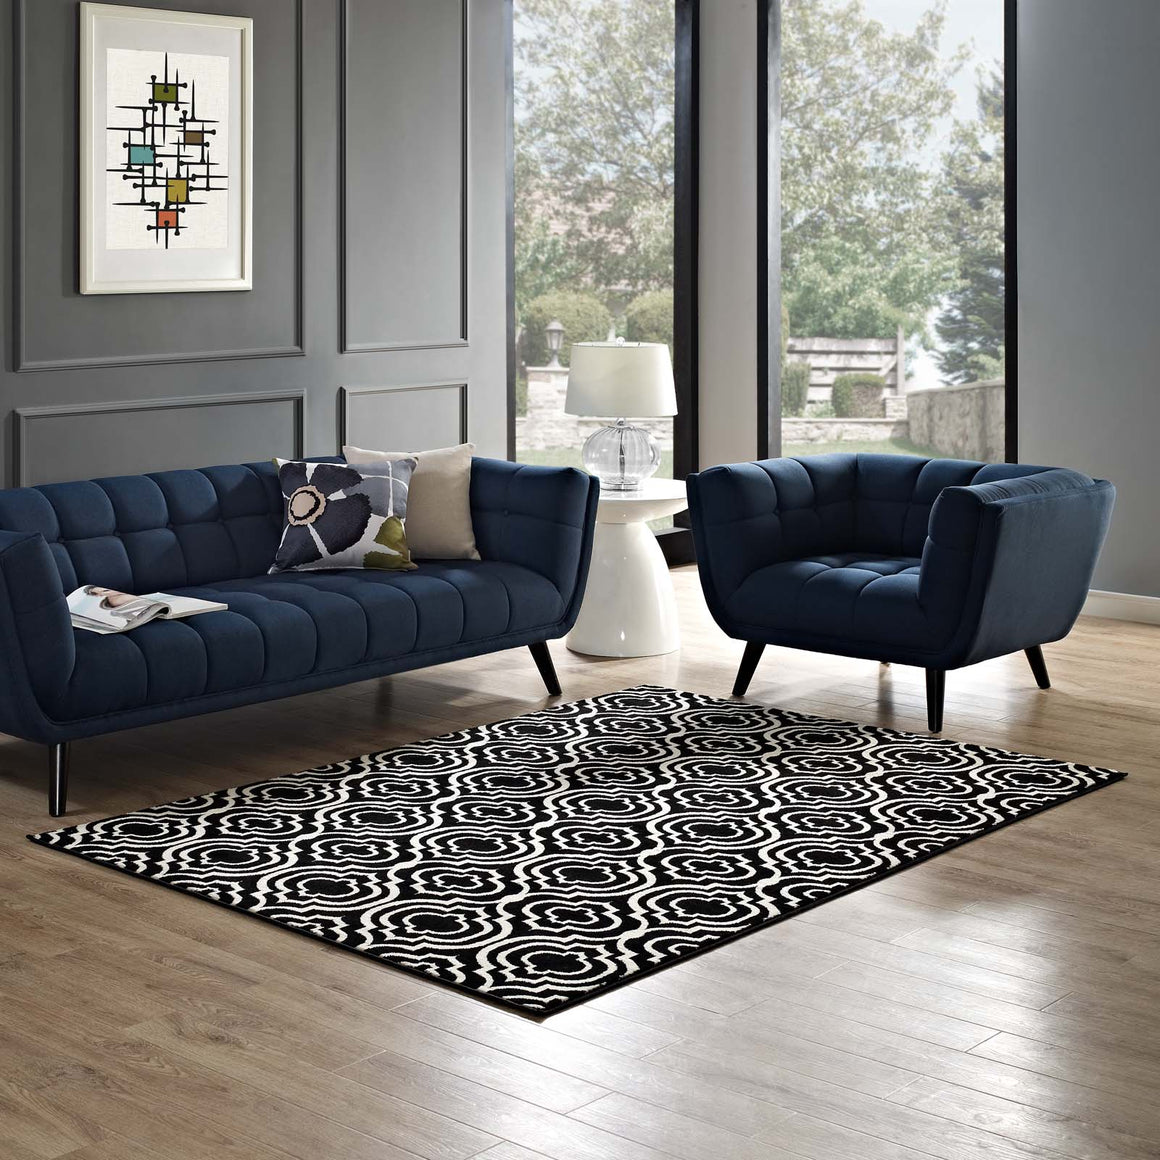 Frame Transitional Moroccan Trellis 5x8 Area Rug  Black and White